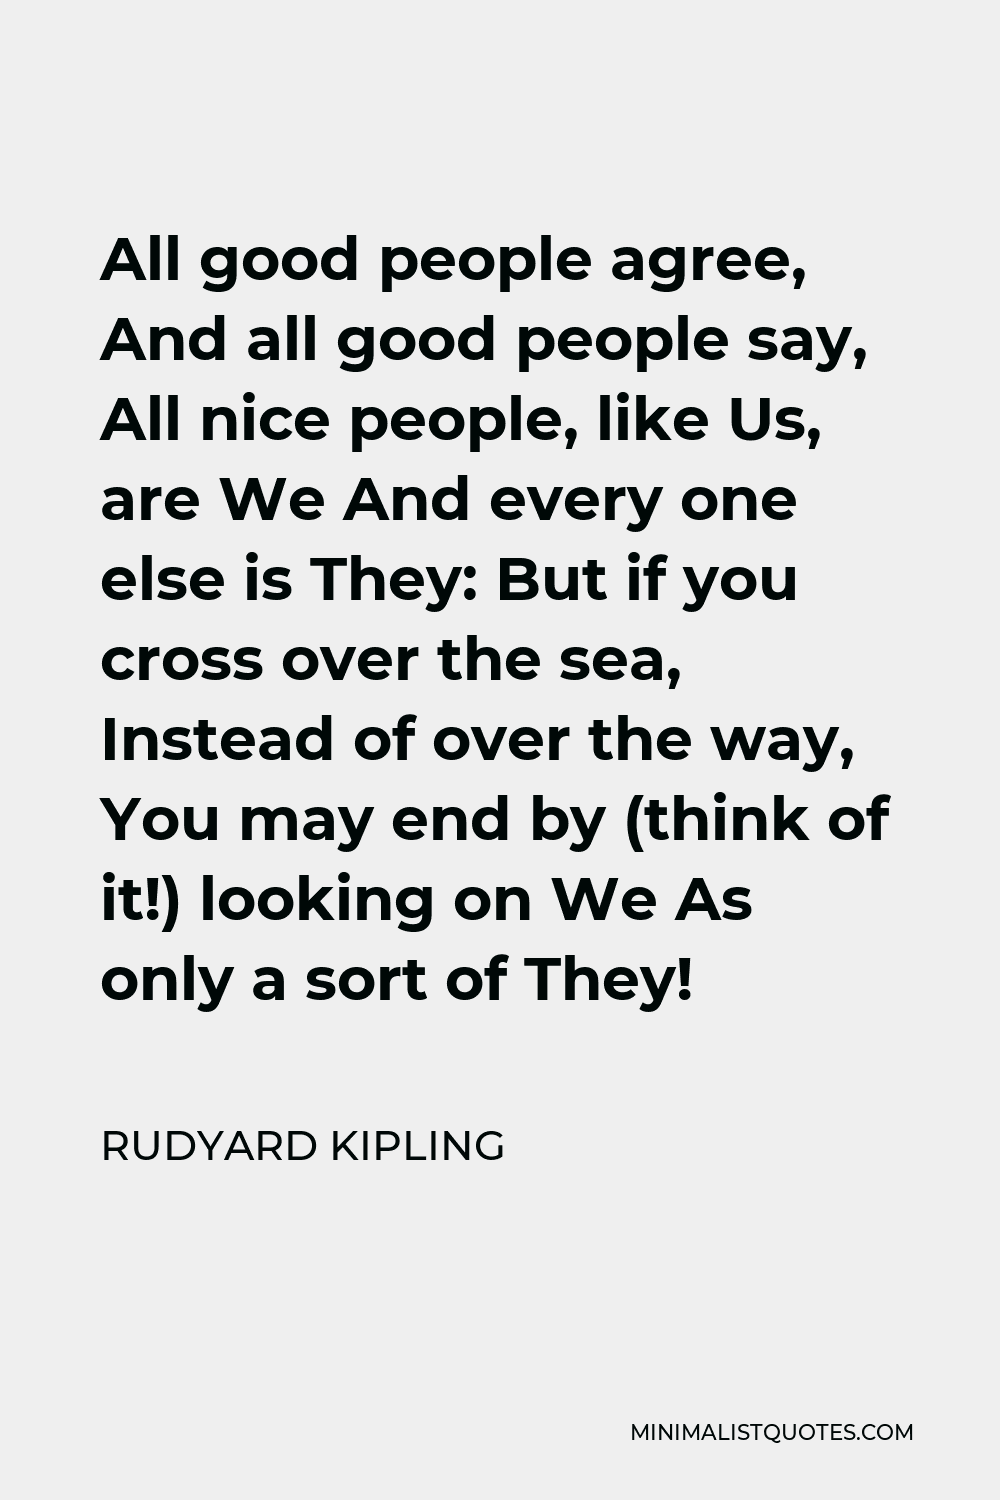 Rudyard Kipling Quote - All good people agree, And all good people say, All nice people, like Us, are We And every one else is They: But if you cross over the sea, Instead of over the way, You may end by (think of it!) looking on We As only a sort of They!